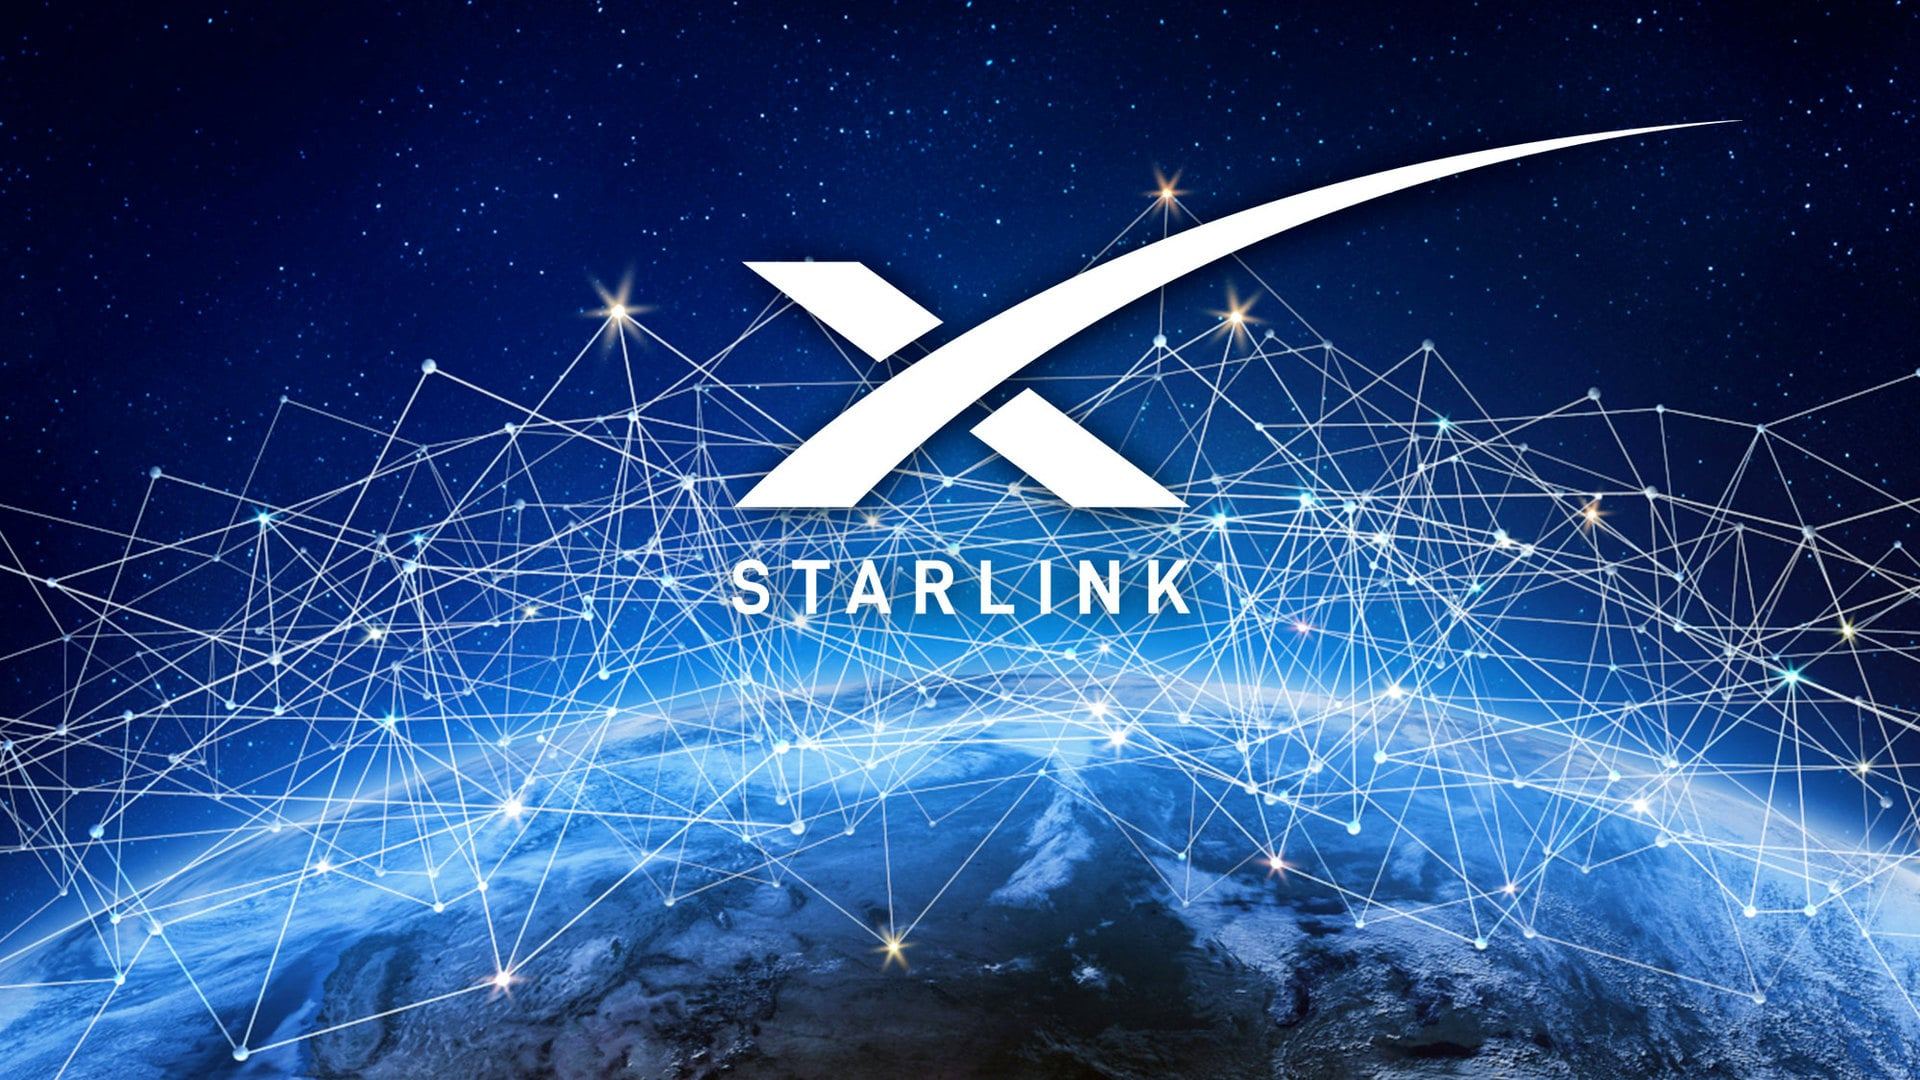 White House in talks with Musk to set up Starlink in Iran